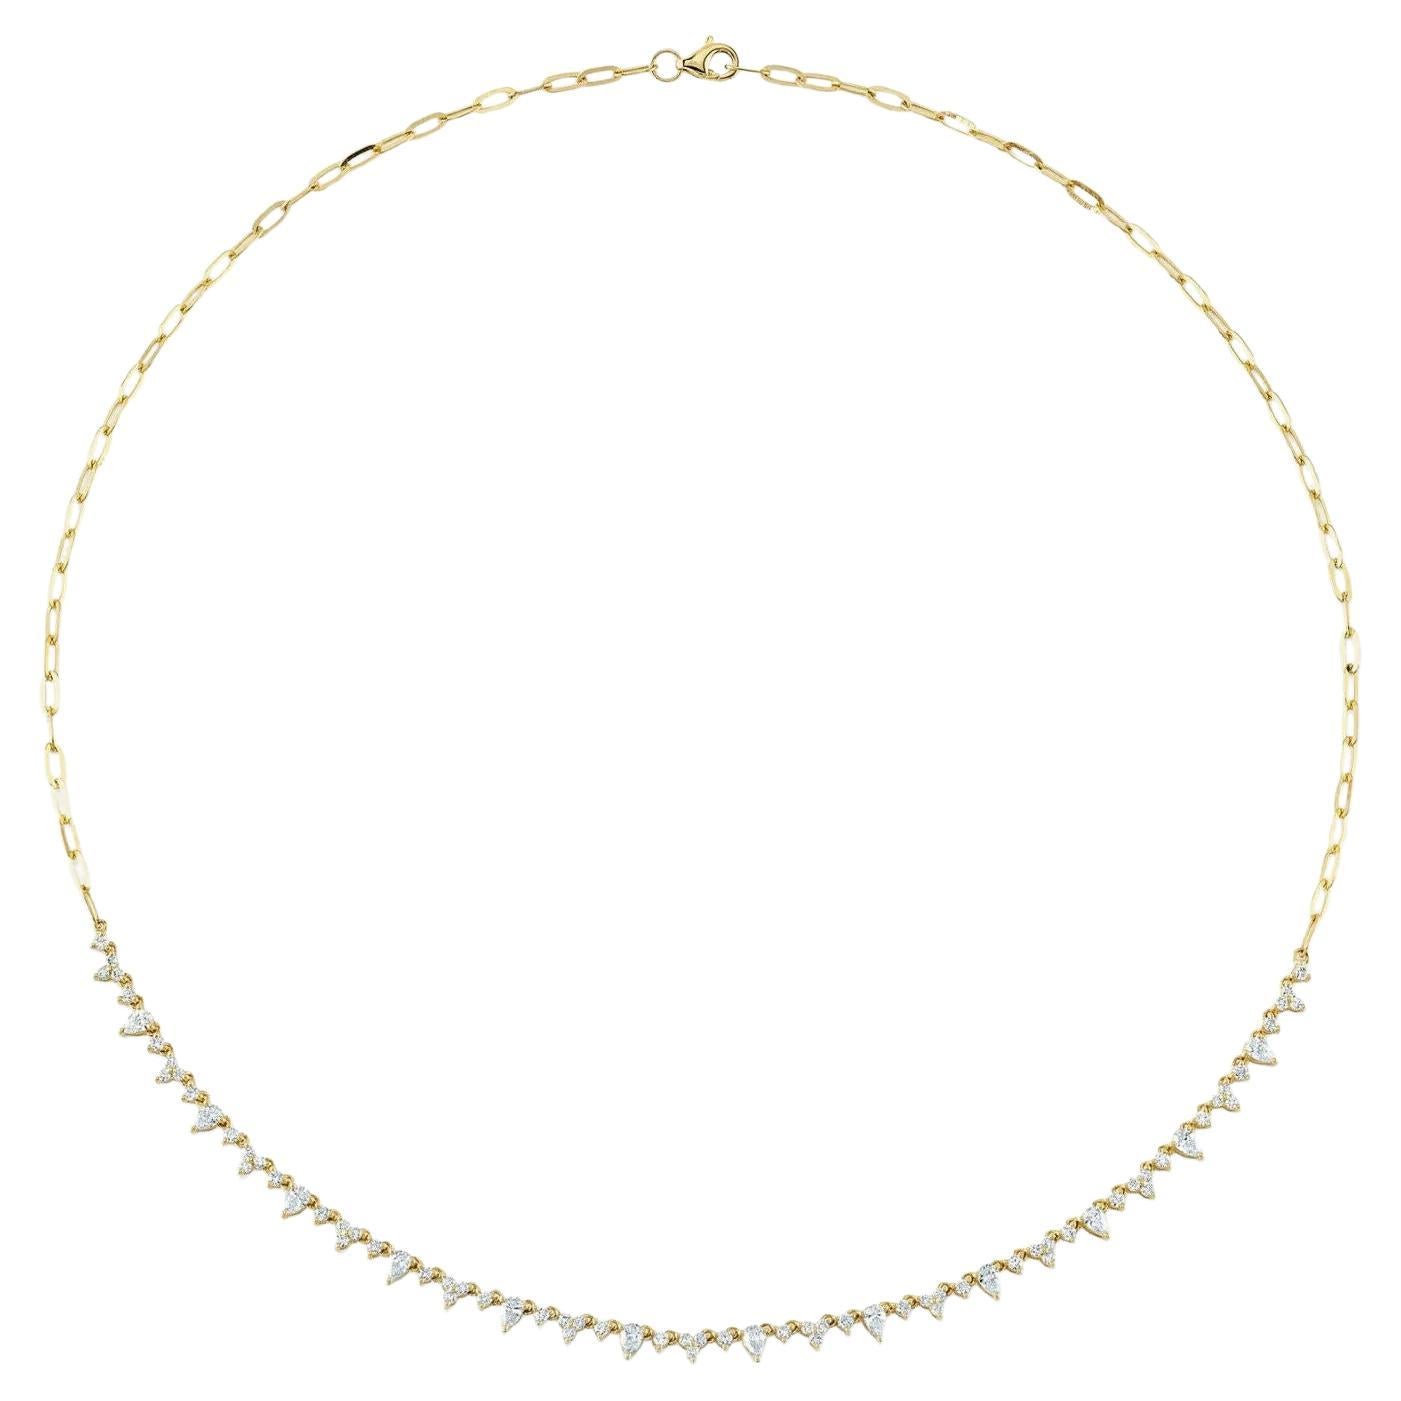 Pear 1.86 Carat Diamond Yellow Gold Dangling Choker Necklace Oval Link Chain For Sale